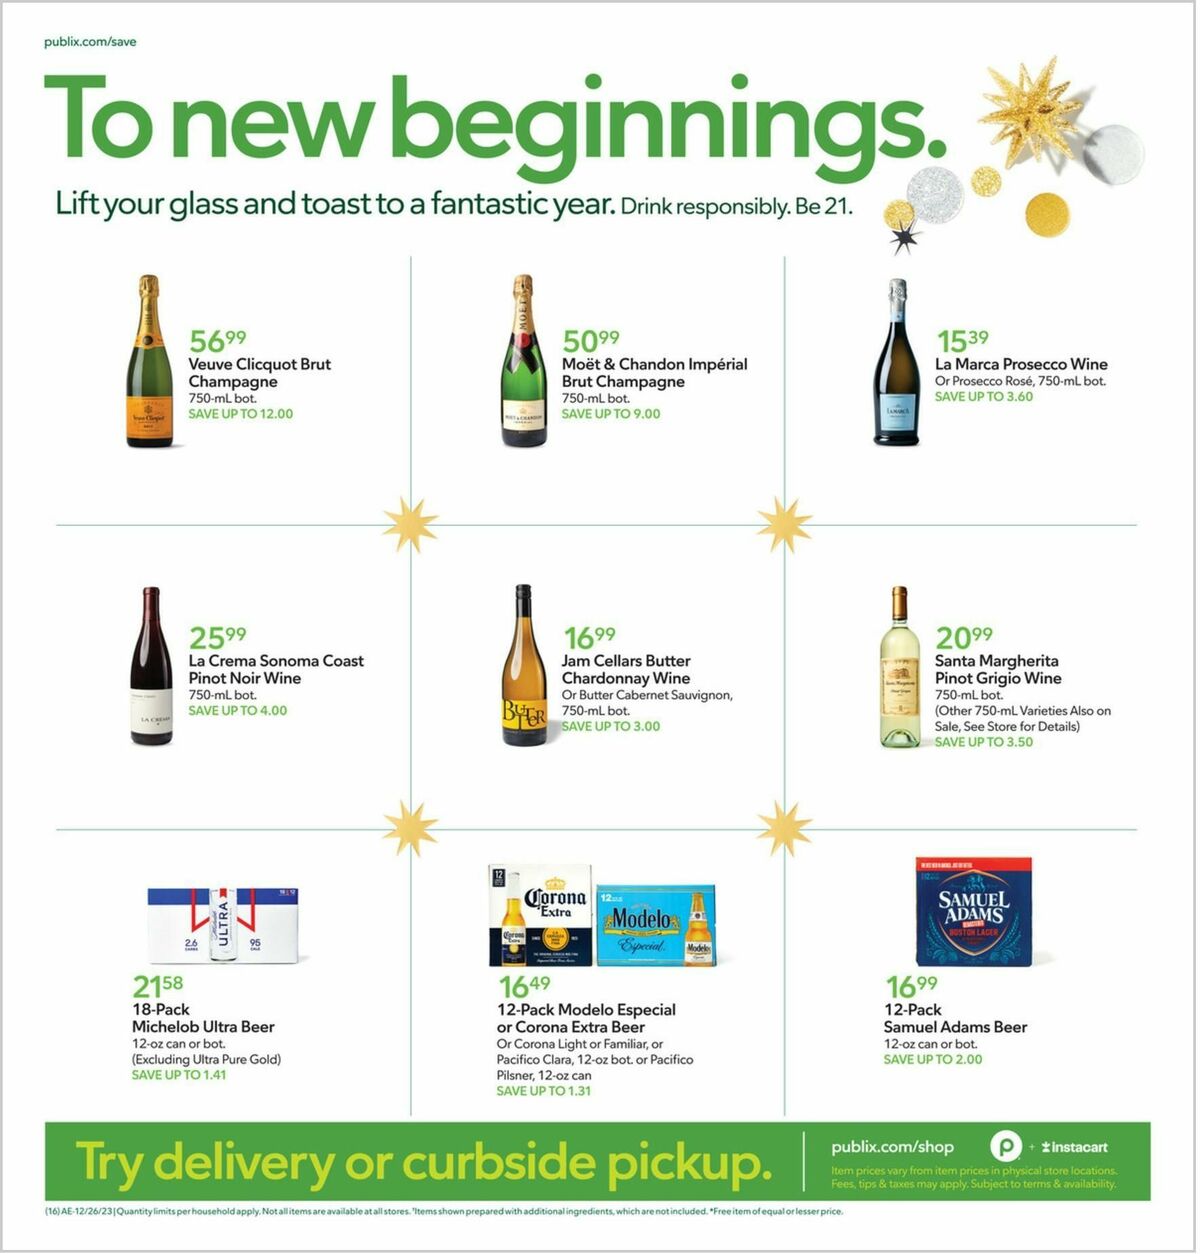 Publix Weekly Ad from December 26